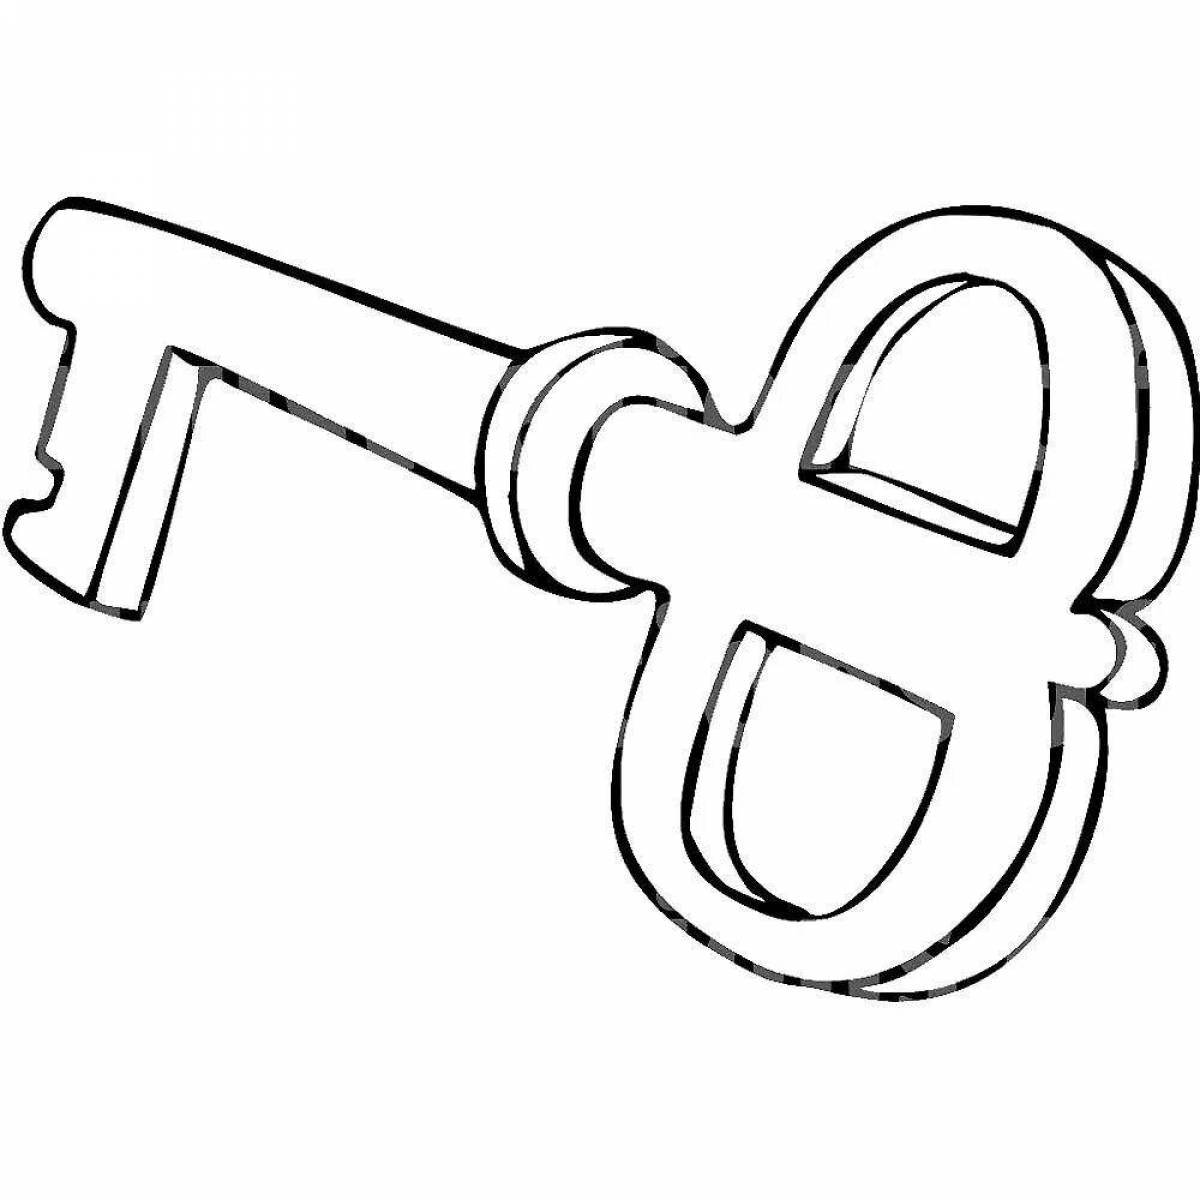 Creative key coloring page